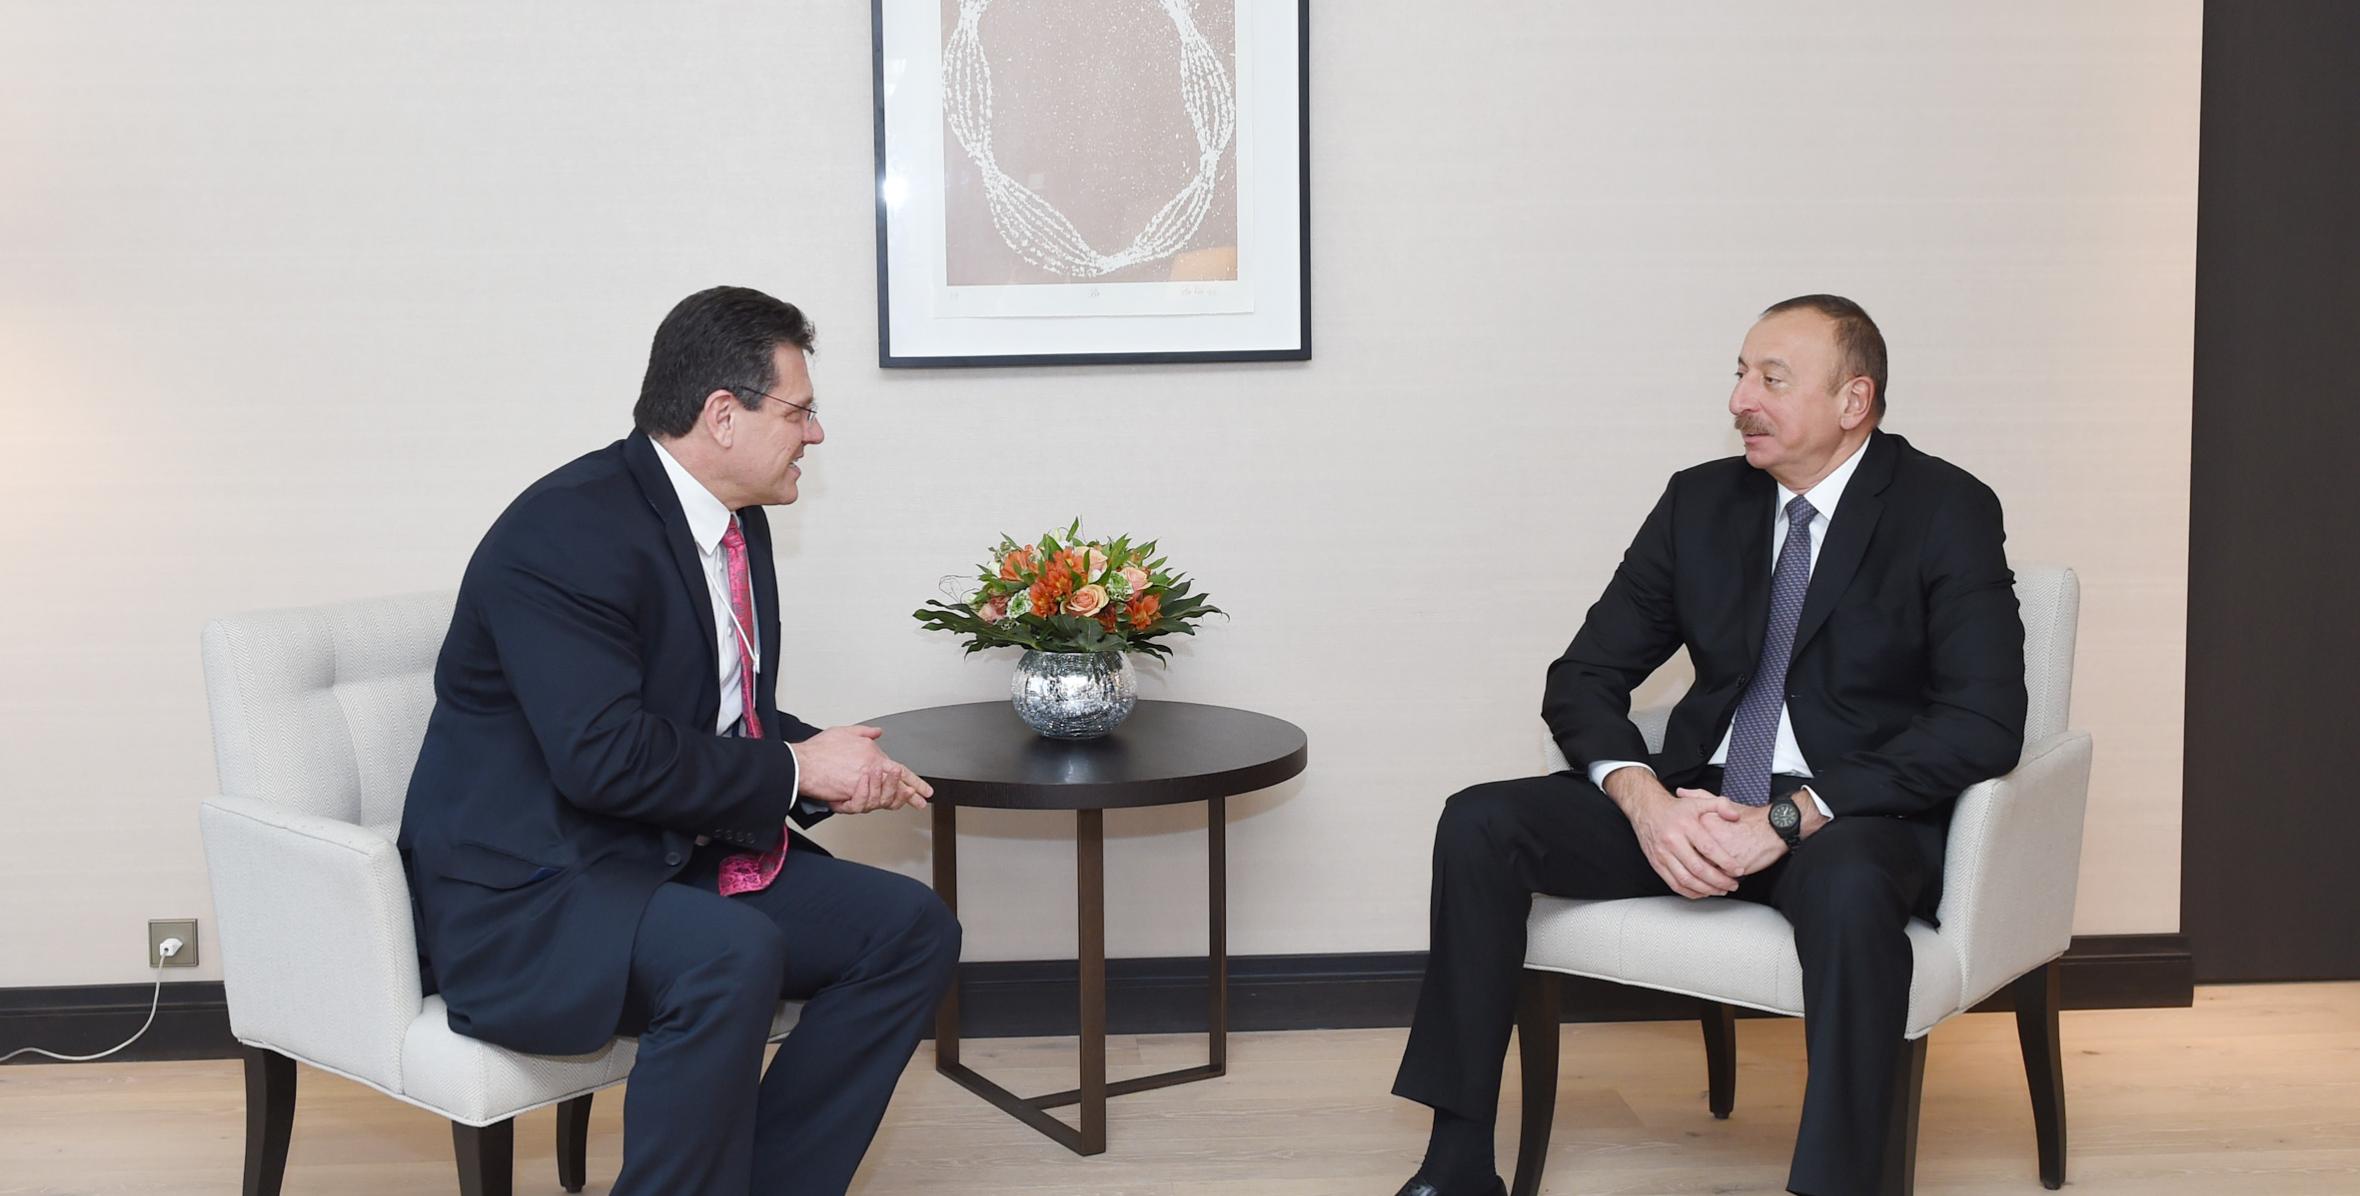 Ilham Aliyev met with European Commission Vice-President for Energy Union in Davos